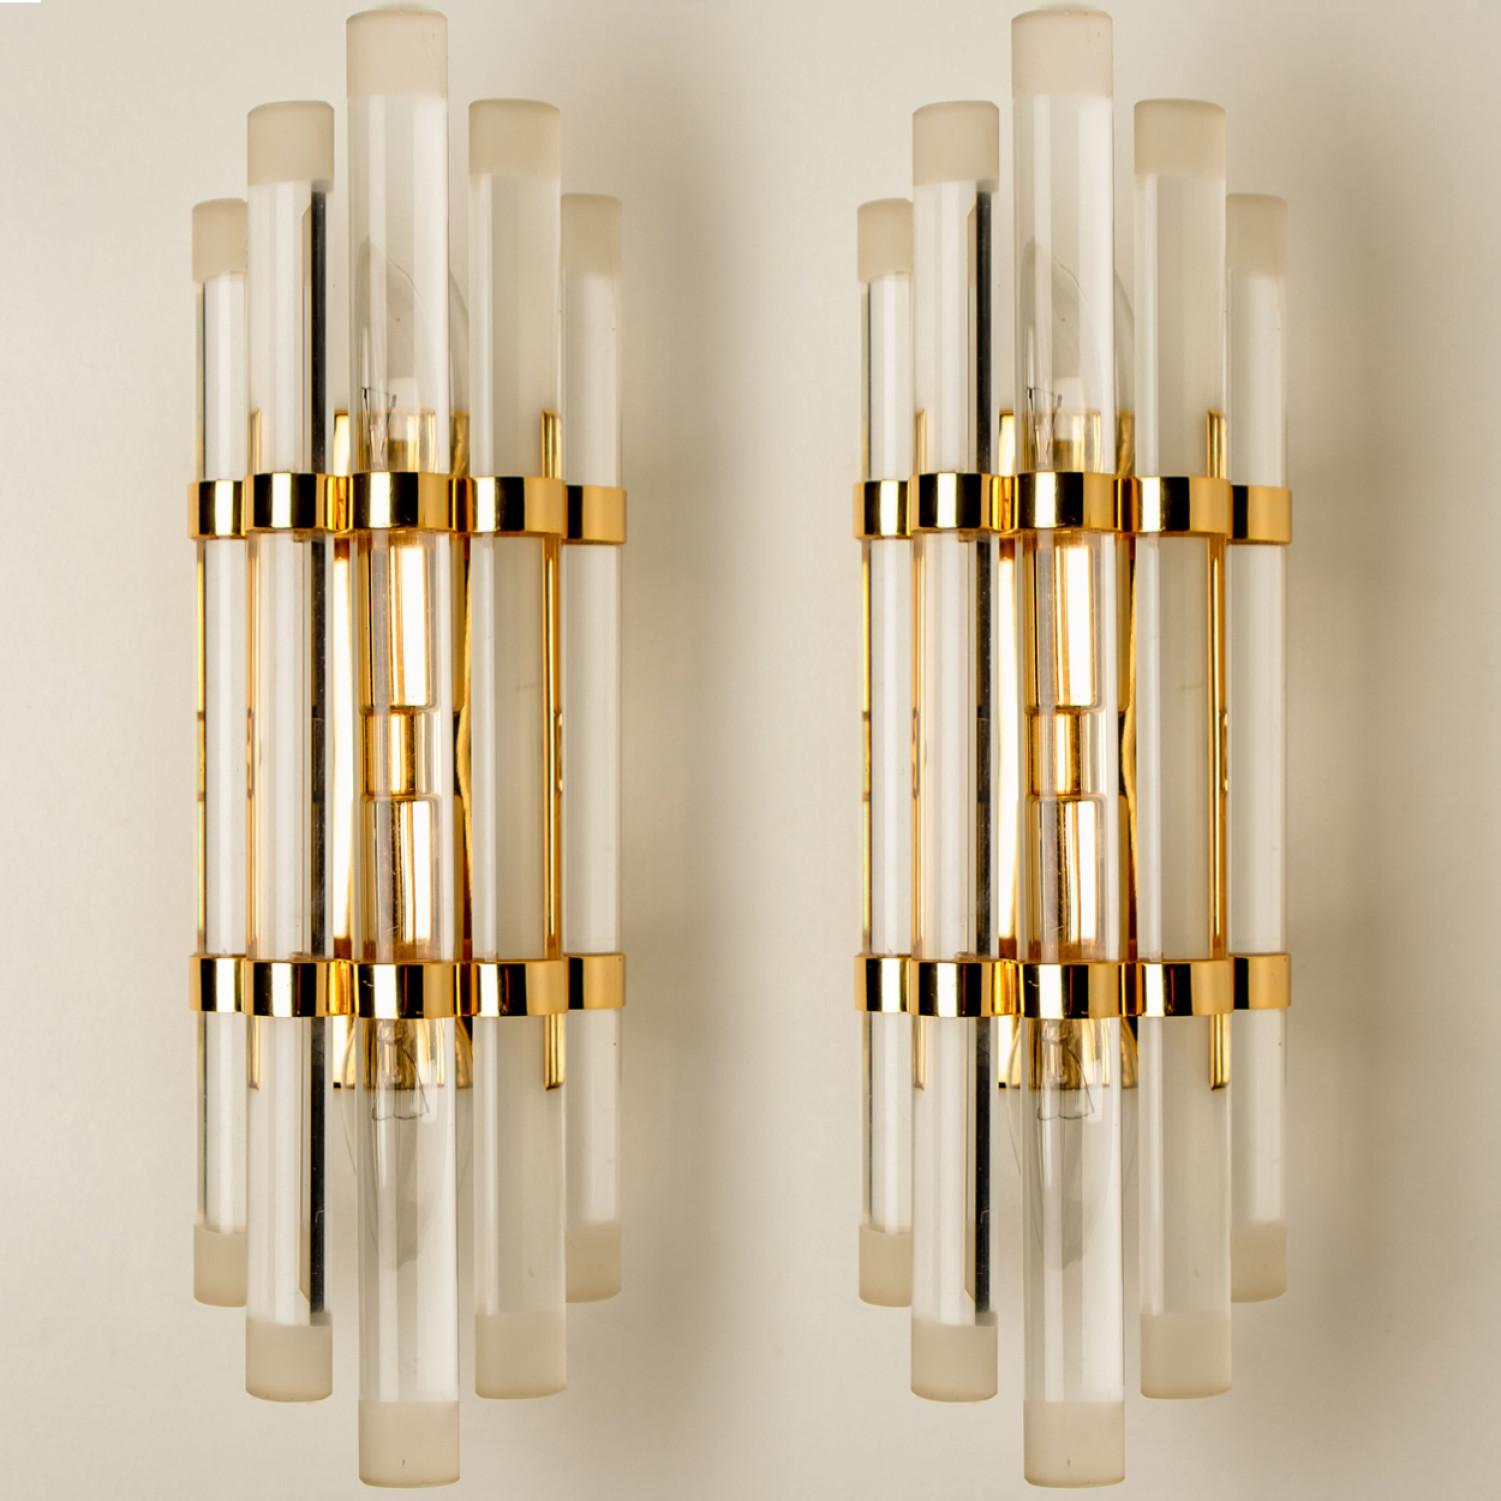 Pair of Murano wall sconces. Each wall sconce is featuring five crystal clear glass semi circles, with brass details and back plate. In the style of Venini.
Illuminates beautifully. High-end pieces.

Please notice the price is for the pair.

Cleaned